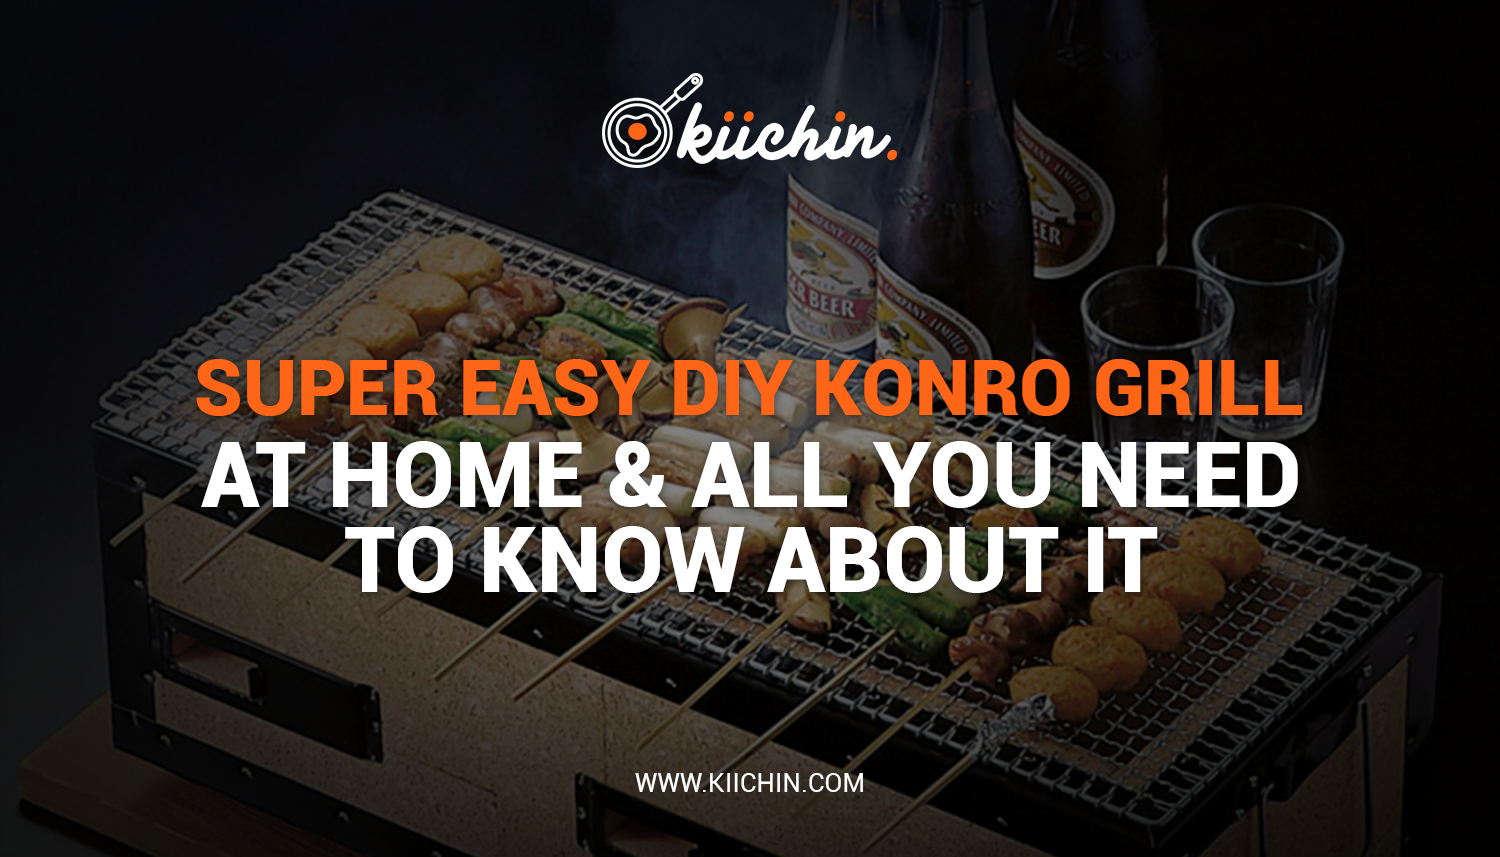 Super easy DIY Konro Grill at home & all you need to know about it